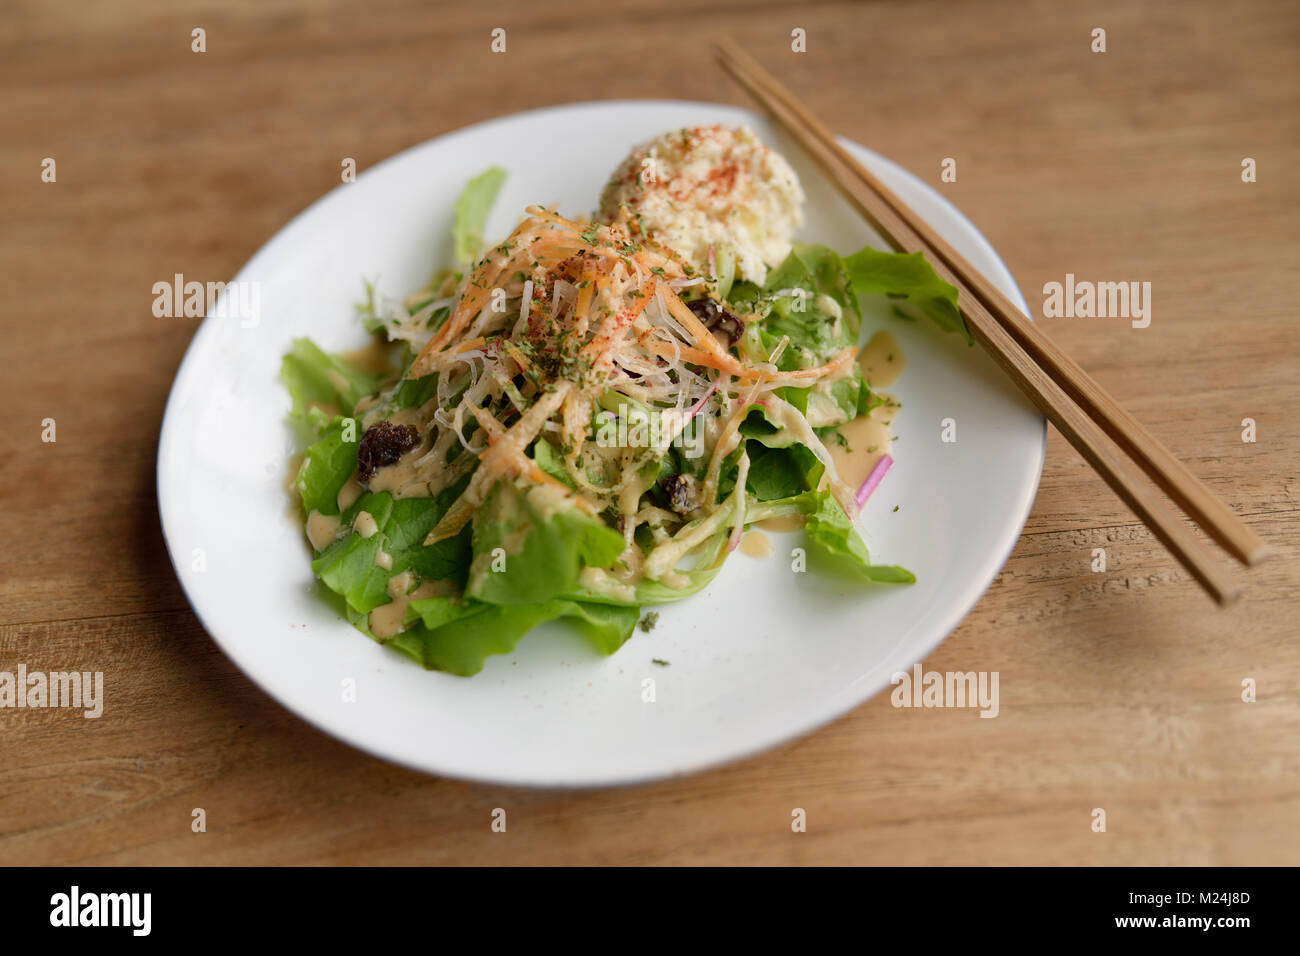 A plate of vegetable salad in a Japanese vegan restaurant, food still life on a wooden table. Kyoto, Japan. Stock Photo